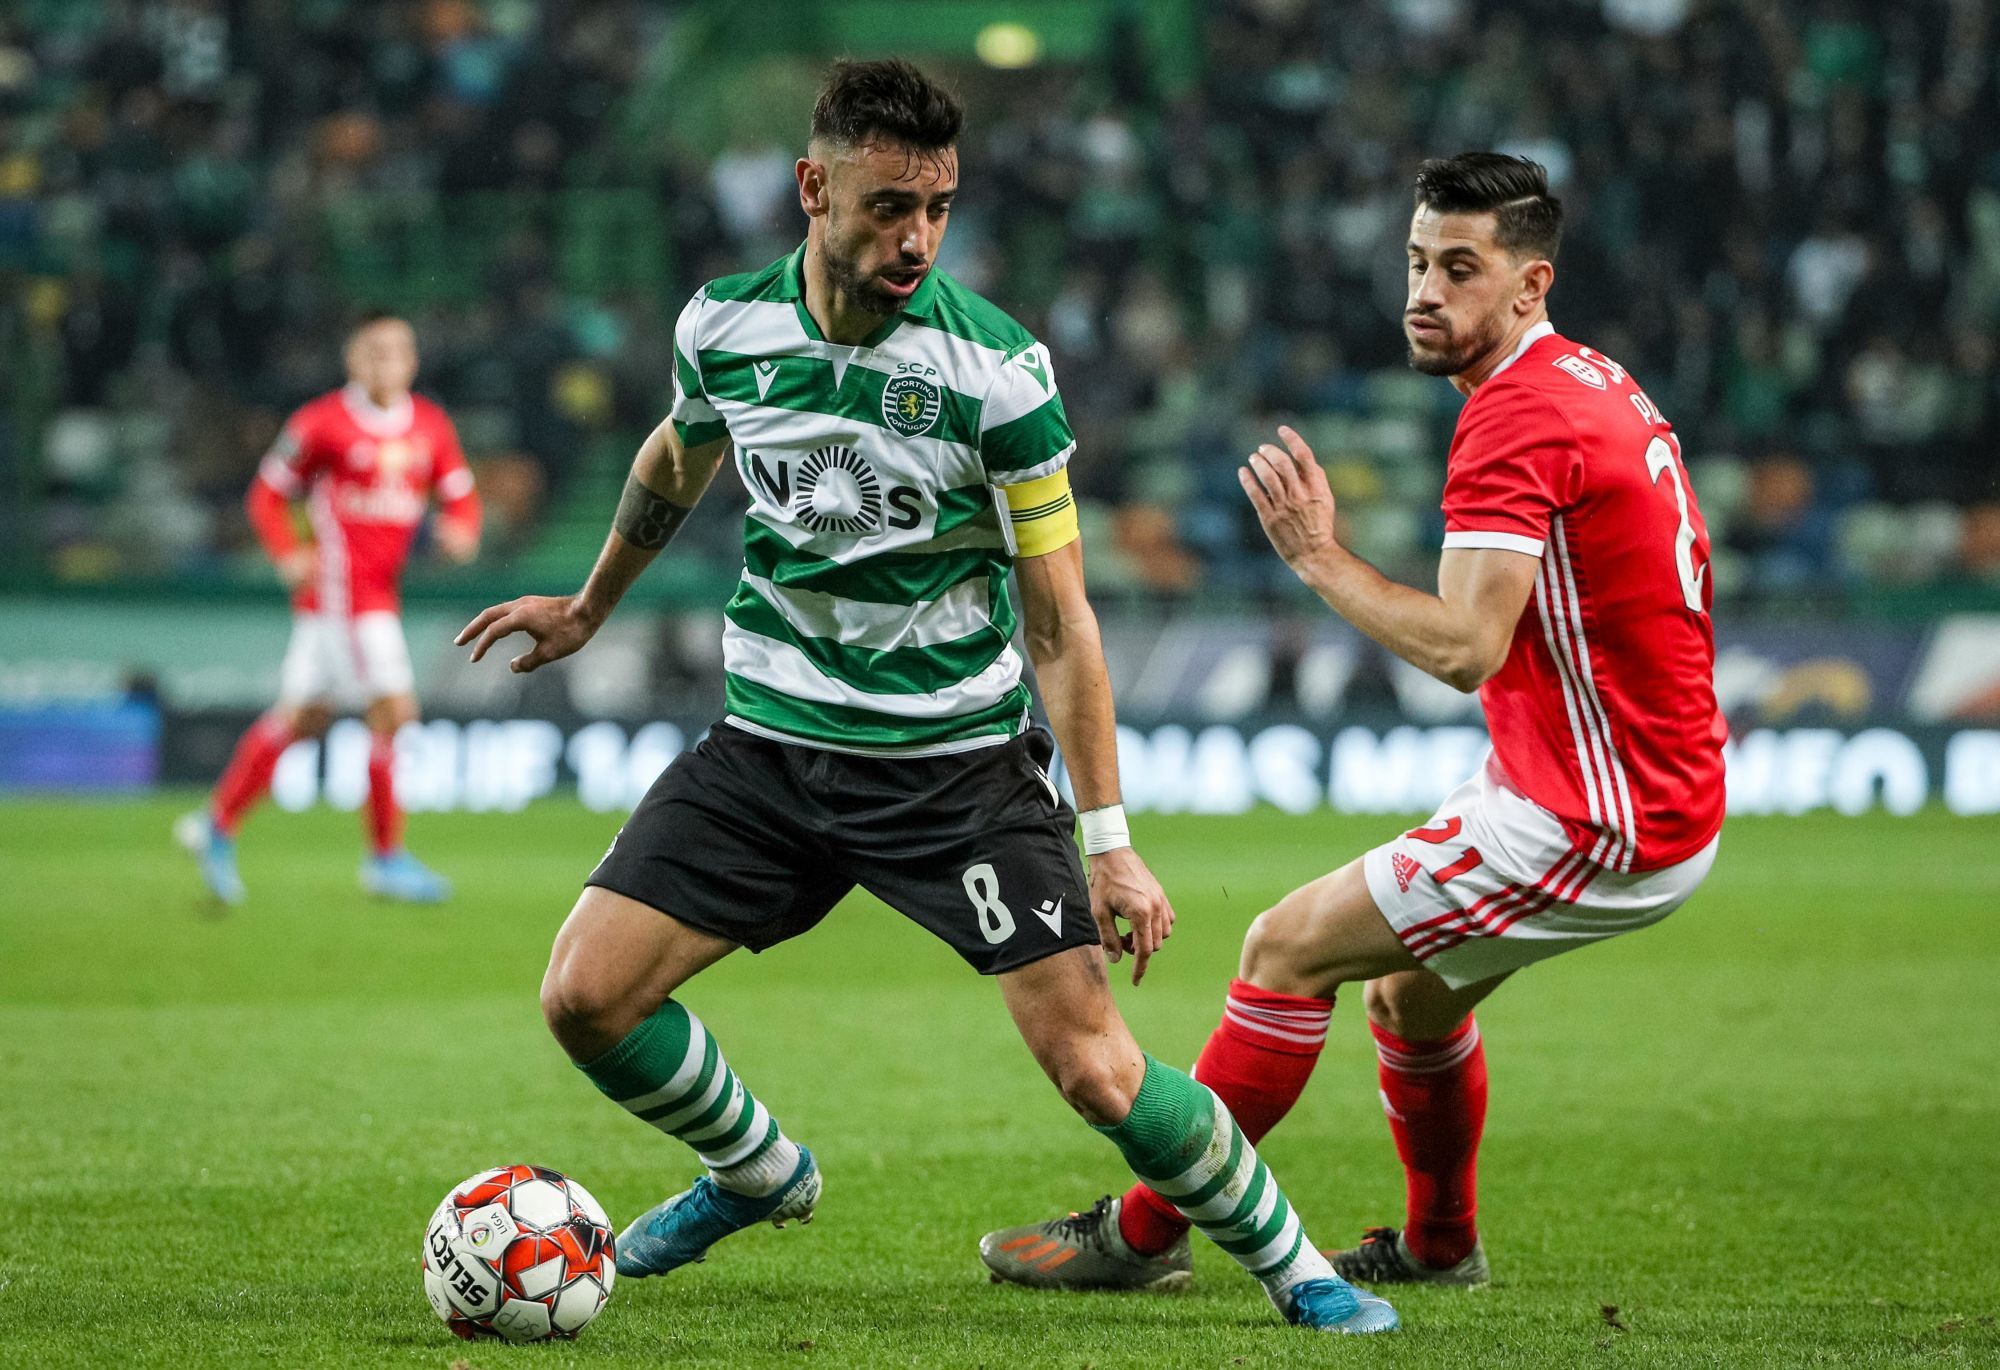 Lisbon, 01/17/2020 - Sporting Clube de Portugal hosted Sport Lisboa e Benfica tonight at the Alvalade Stadium in Lisbon, in a match counting for the 17th Premier League Day 2019/20. Bruno Fernandes; Pizzi (Filipe Amorim / Global Images) 


Photo by Icon Sport - Bruno FERNANDES - PIZZI - Estadio Jose Alvalade - Lisbonne (Portugal)